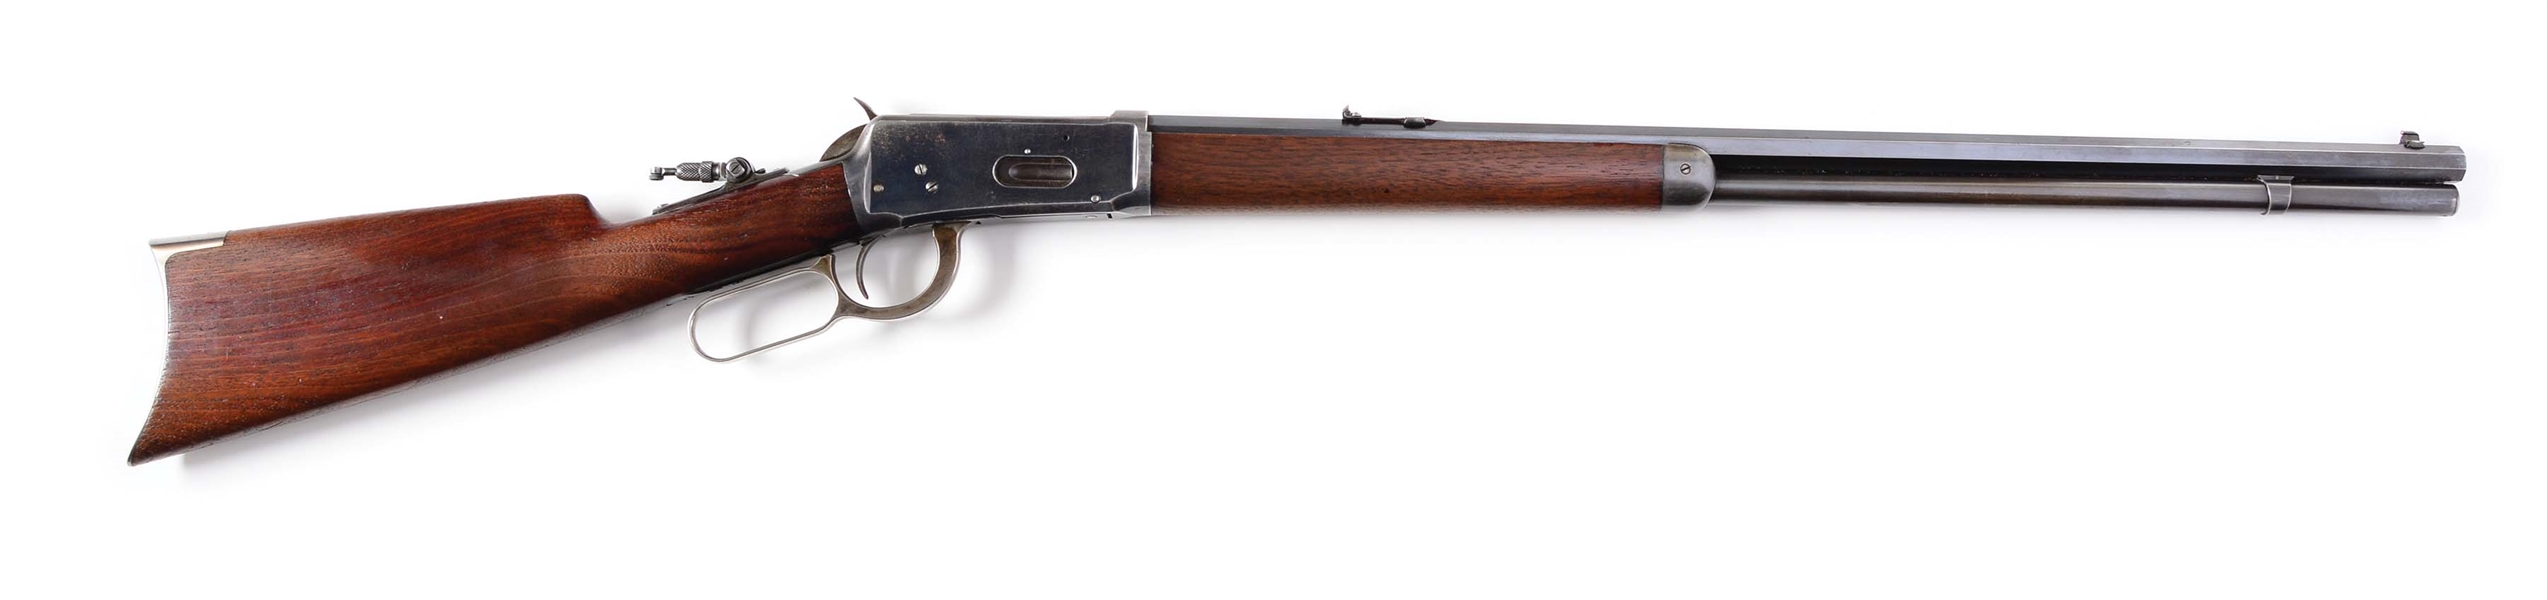 (C) WINCHESTER 1894 LEVER ACTON RIFLE (1896).